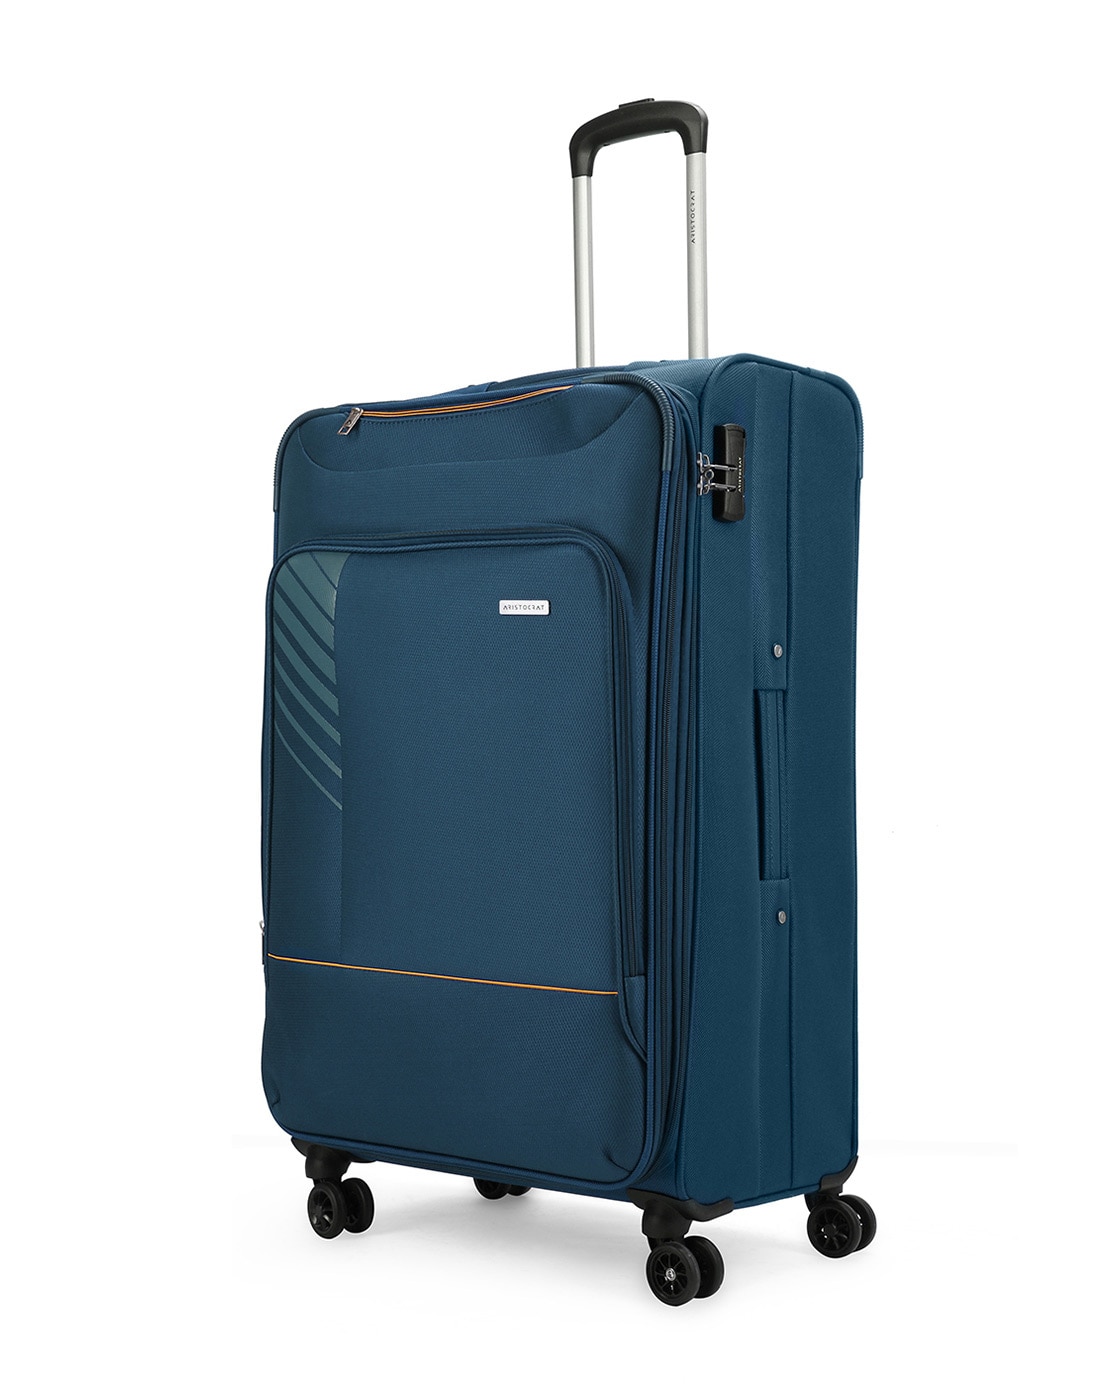 Aristocrat Luggage Bag in Mumbai - Dealers, Manufacturers & Suppliers  -Justdial